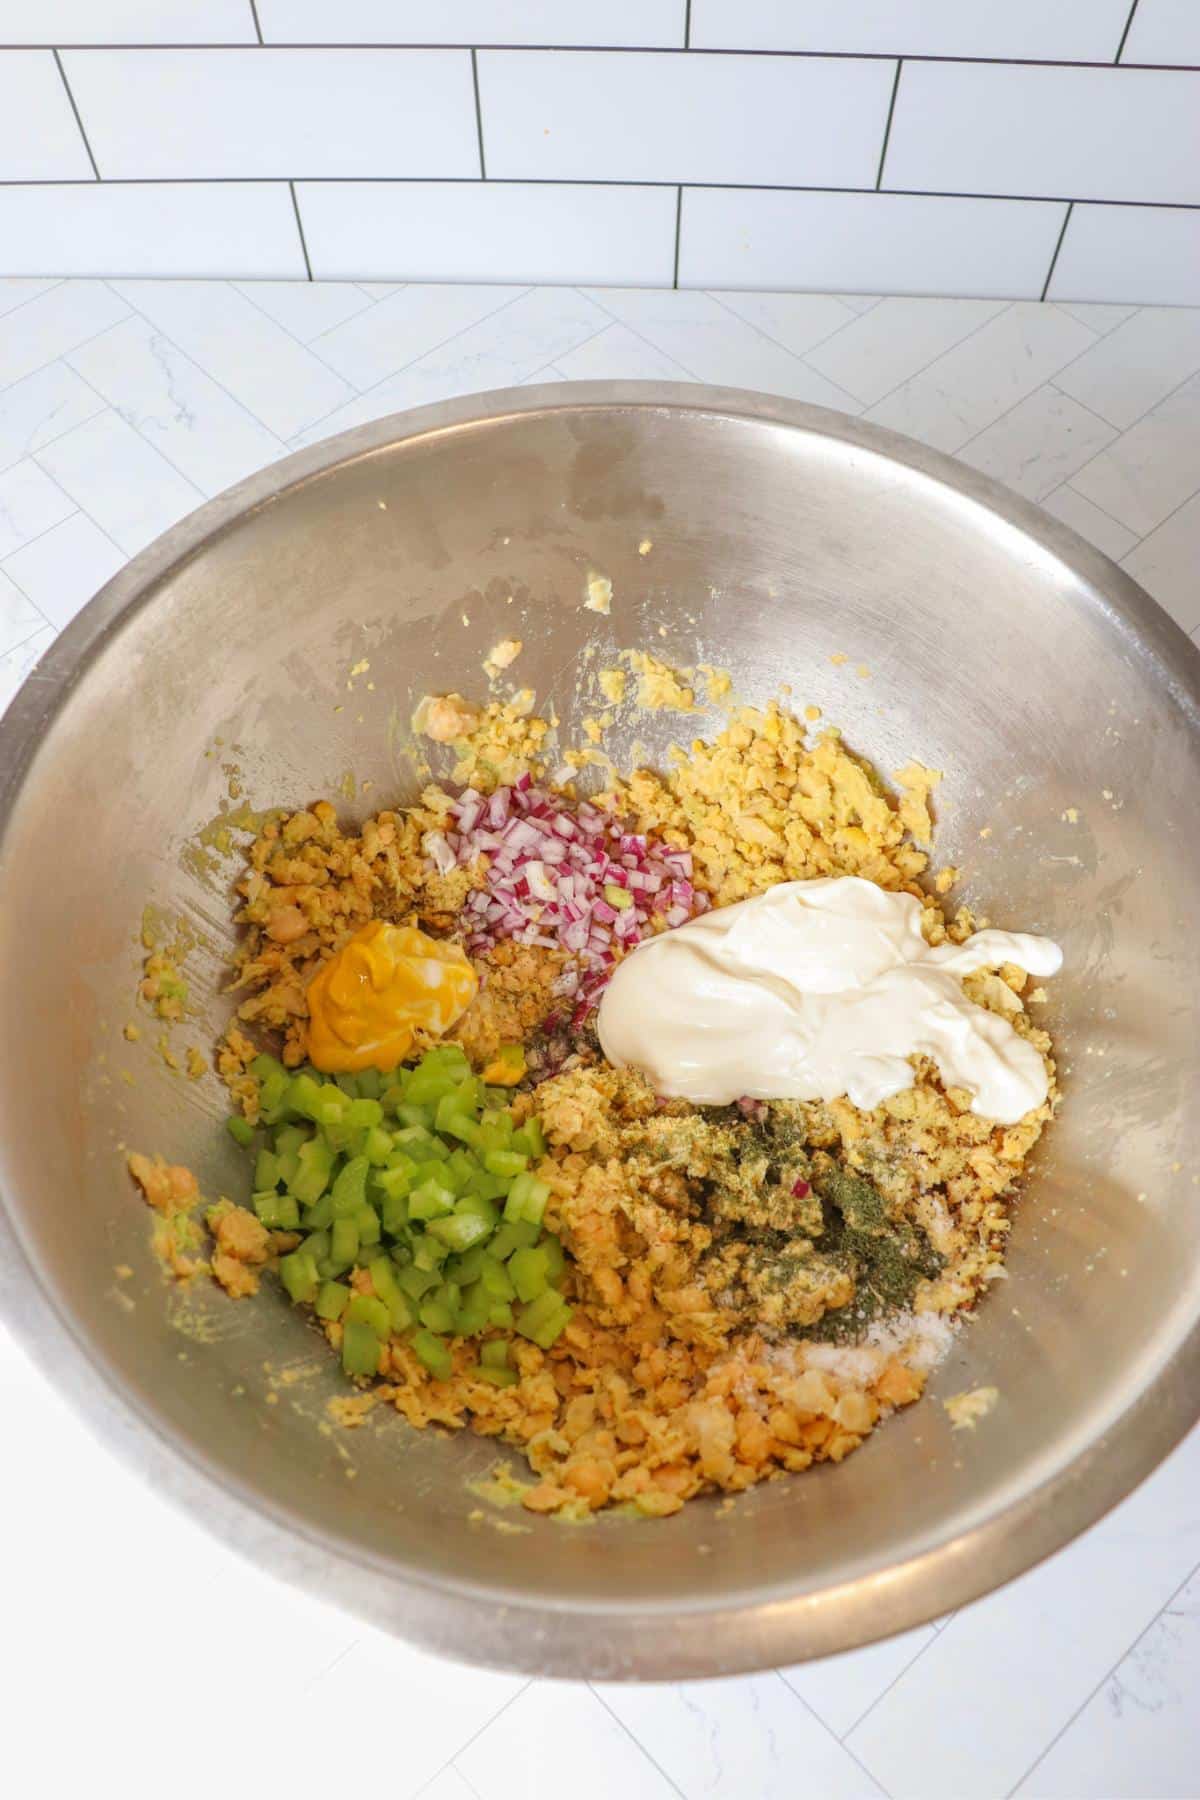 Chickpea salad sandwich ingredients in a mixing bowl before getting mixed